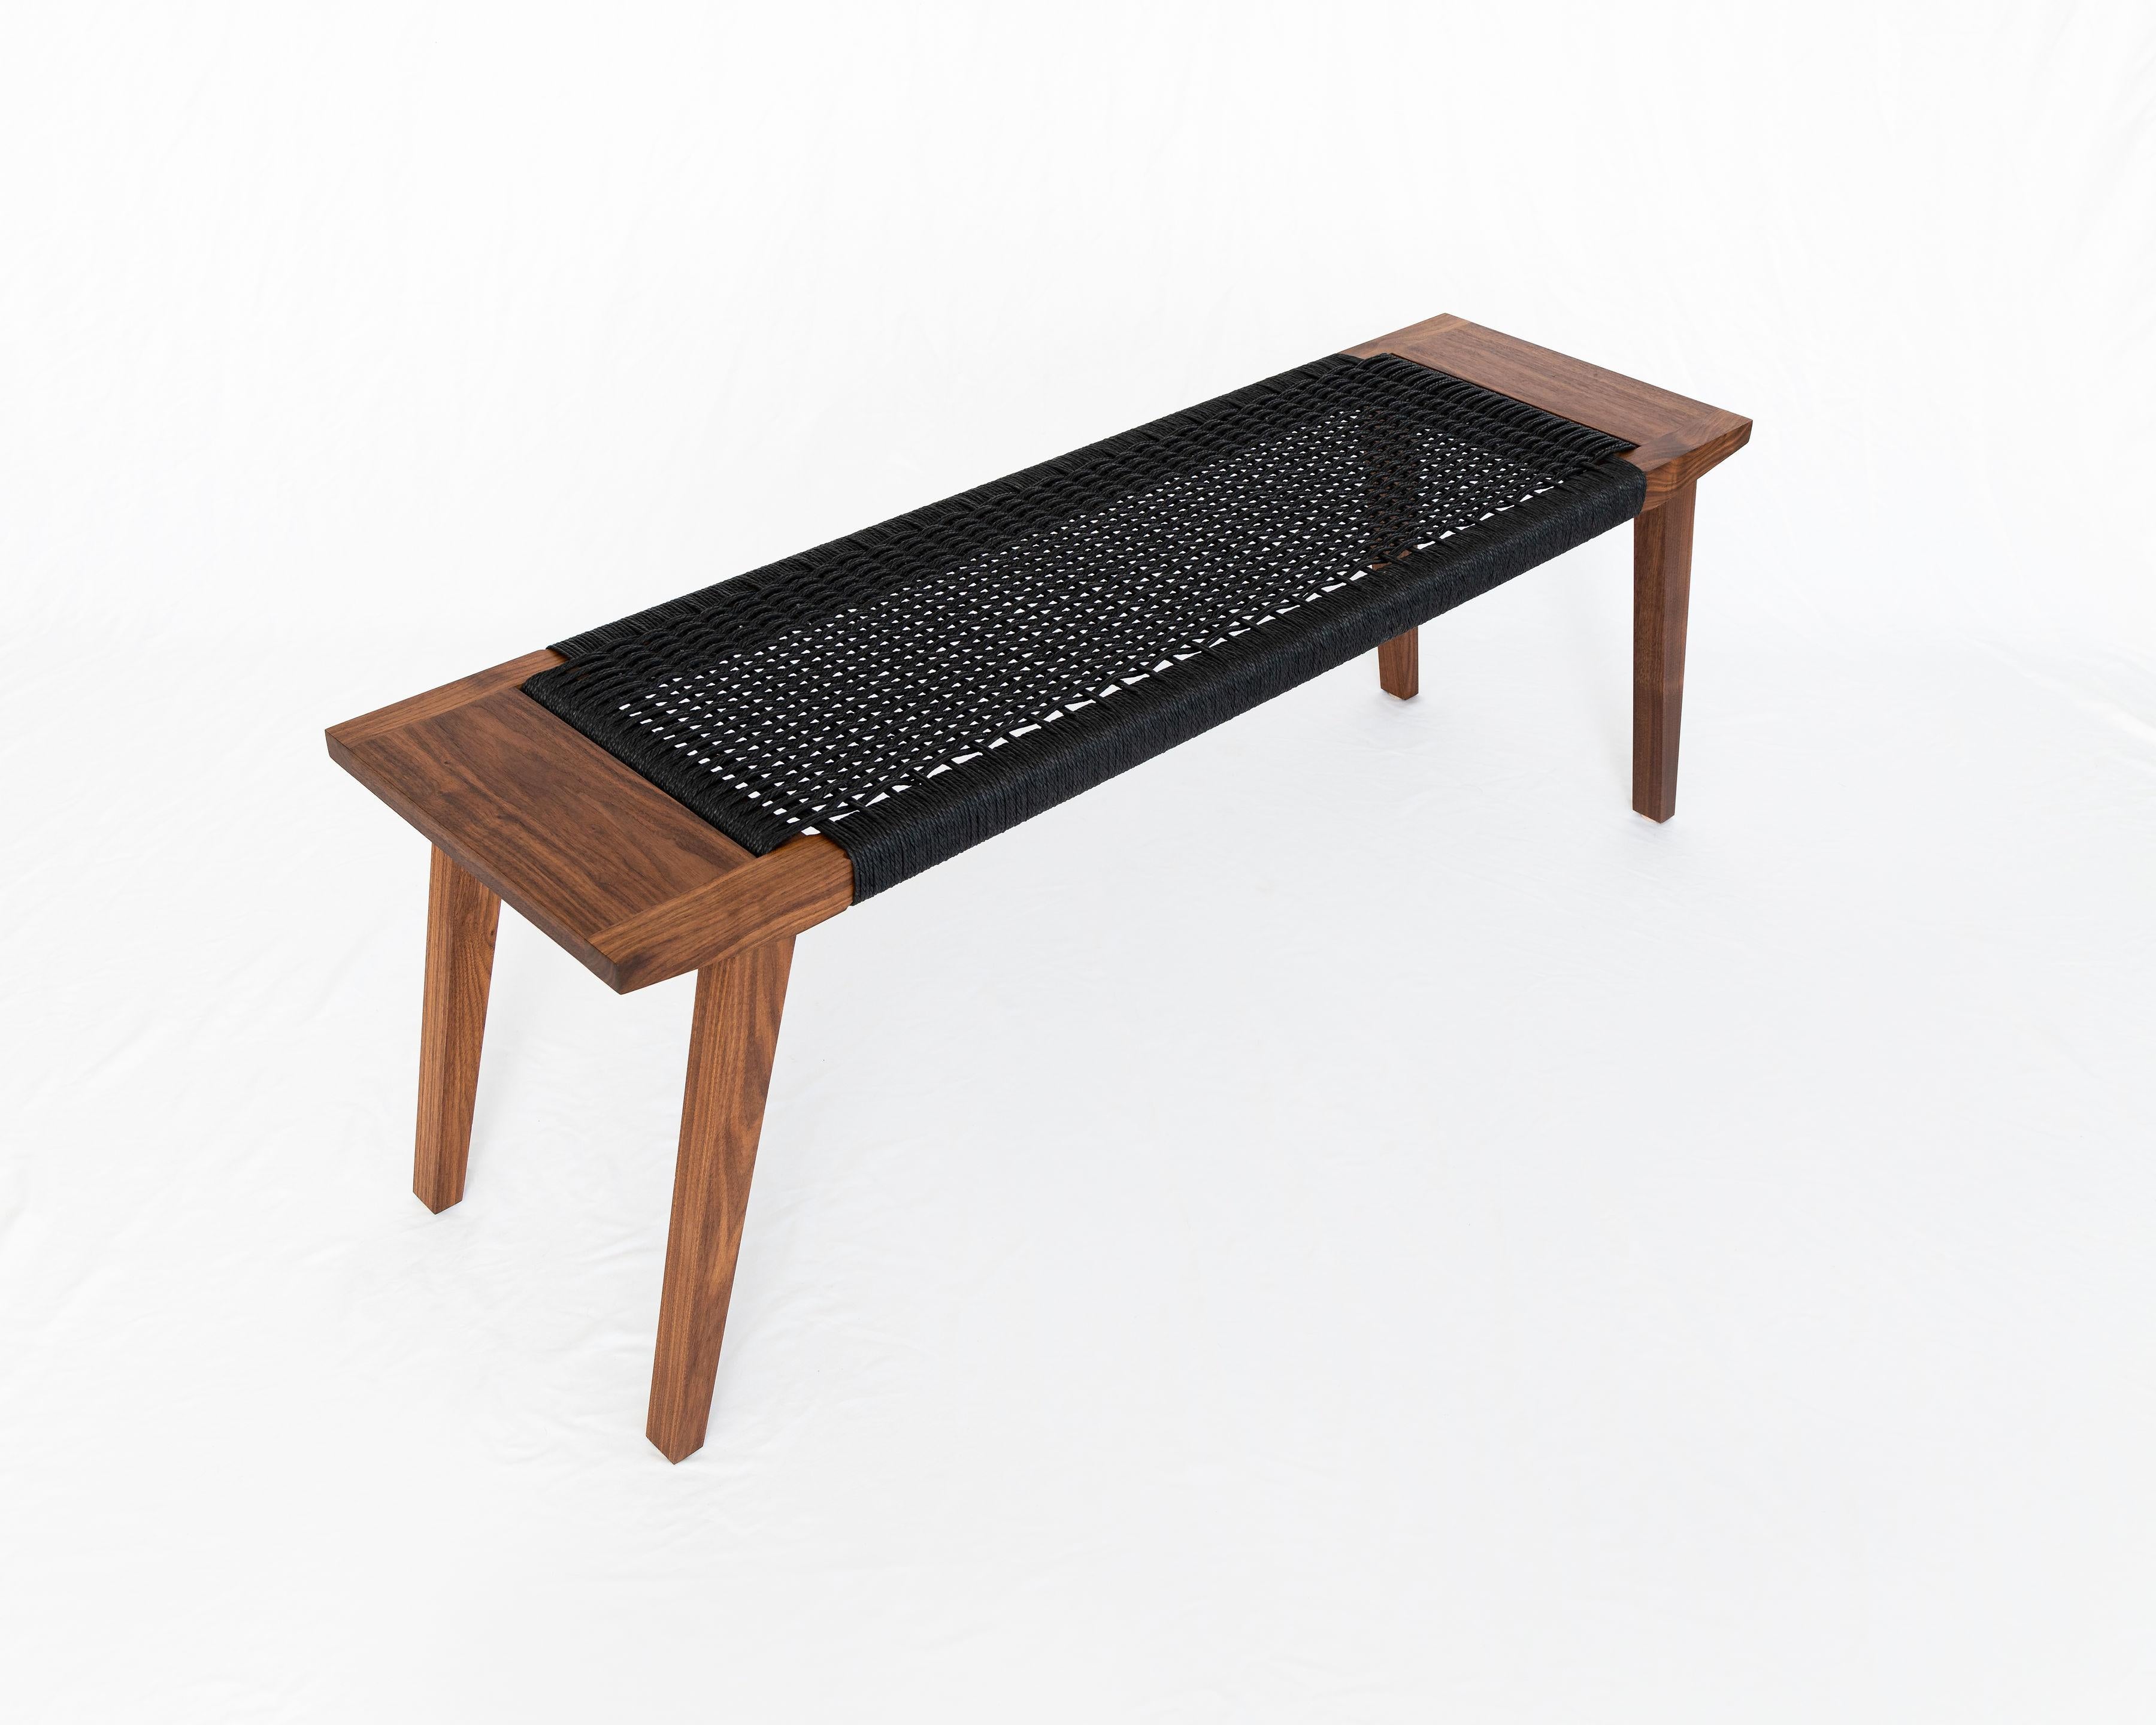 Featuring woven paper cord, walnut, and modest tapers, the Canva bench explores a love for material and craftsmanship welded with warm welcome. Constructed with a mortice and Tenon frame and handwoven seat, the Canva bench is artisan-crafted from